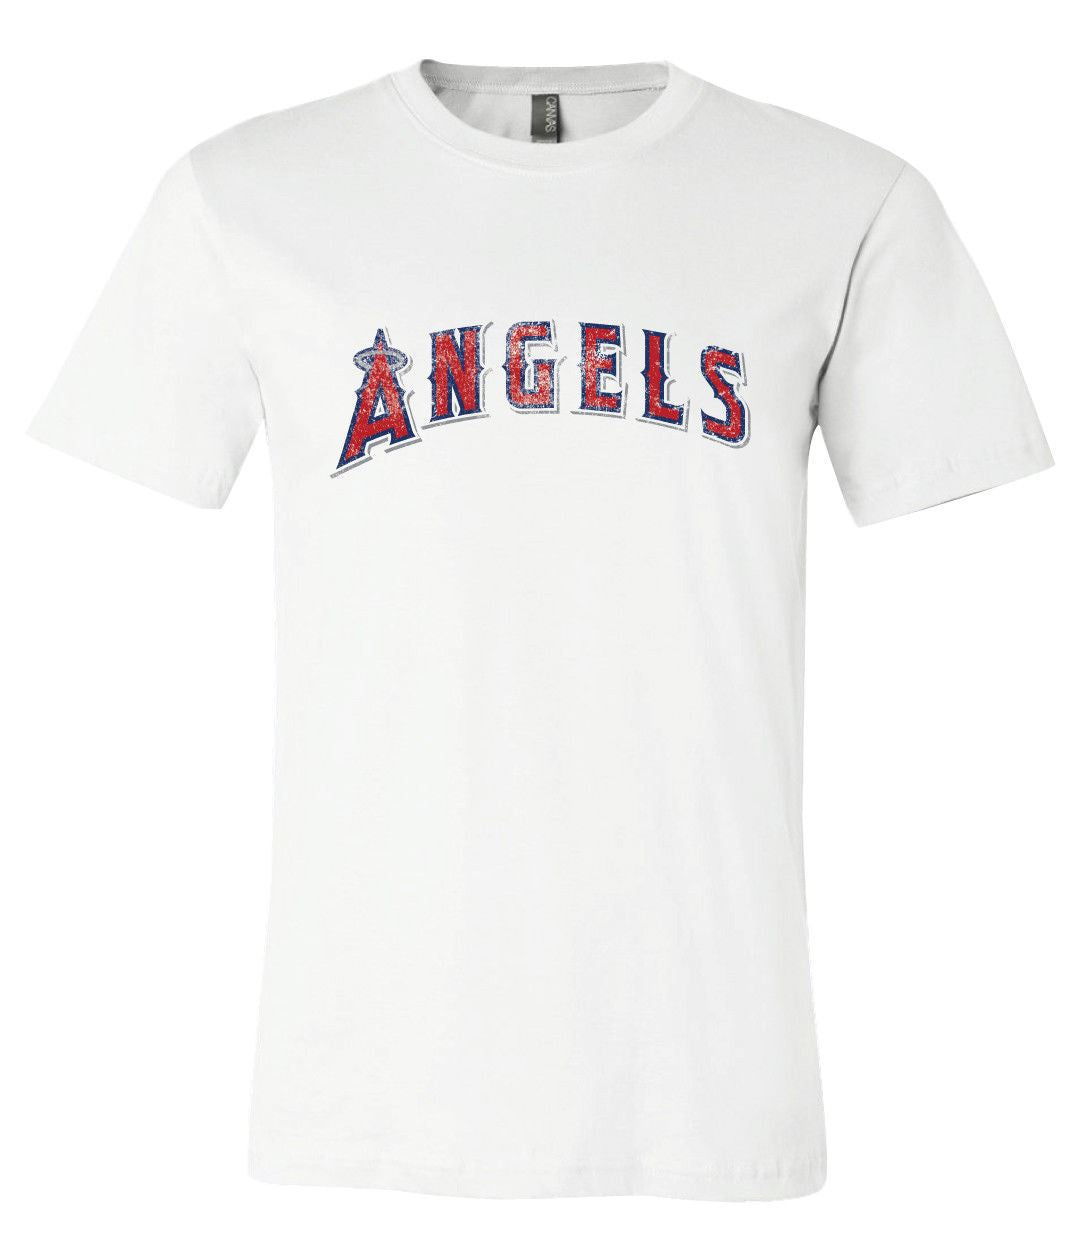 Los Angeles Angels of Anaheim text Distressed Vintage T-shirt 6